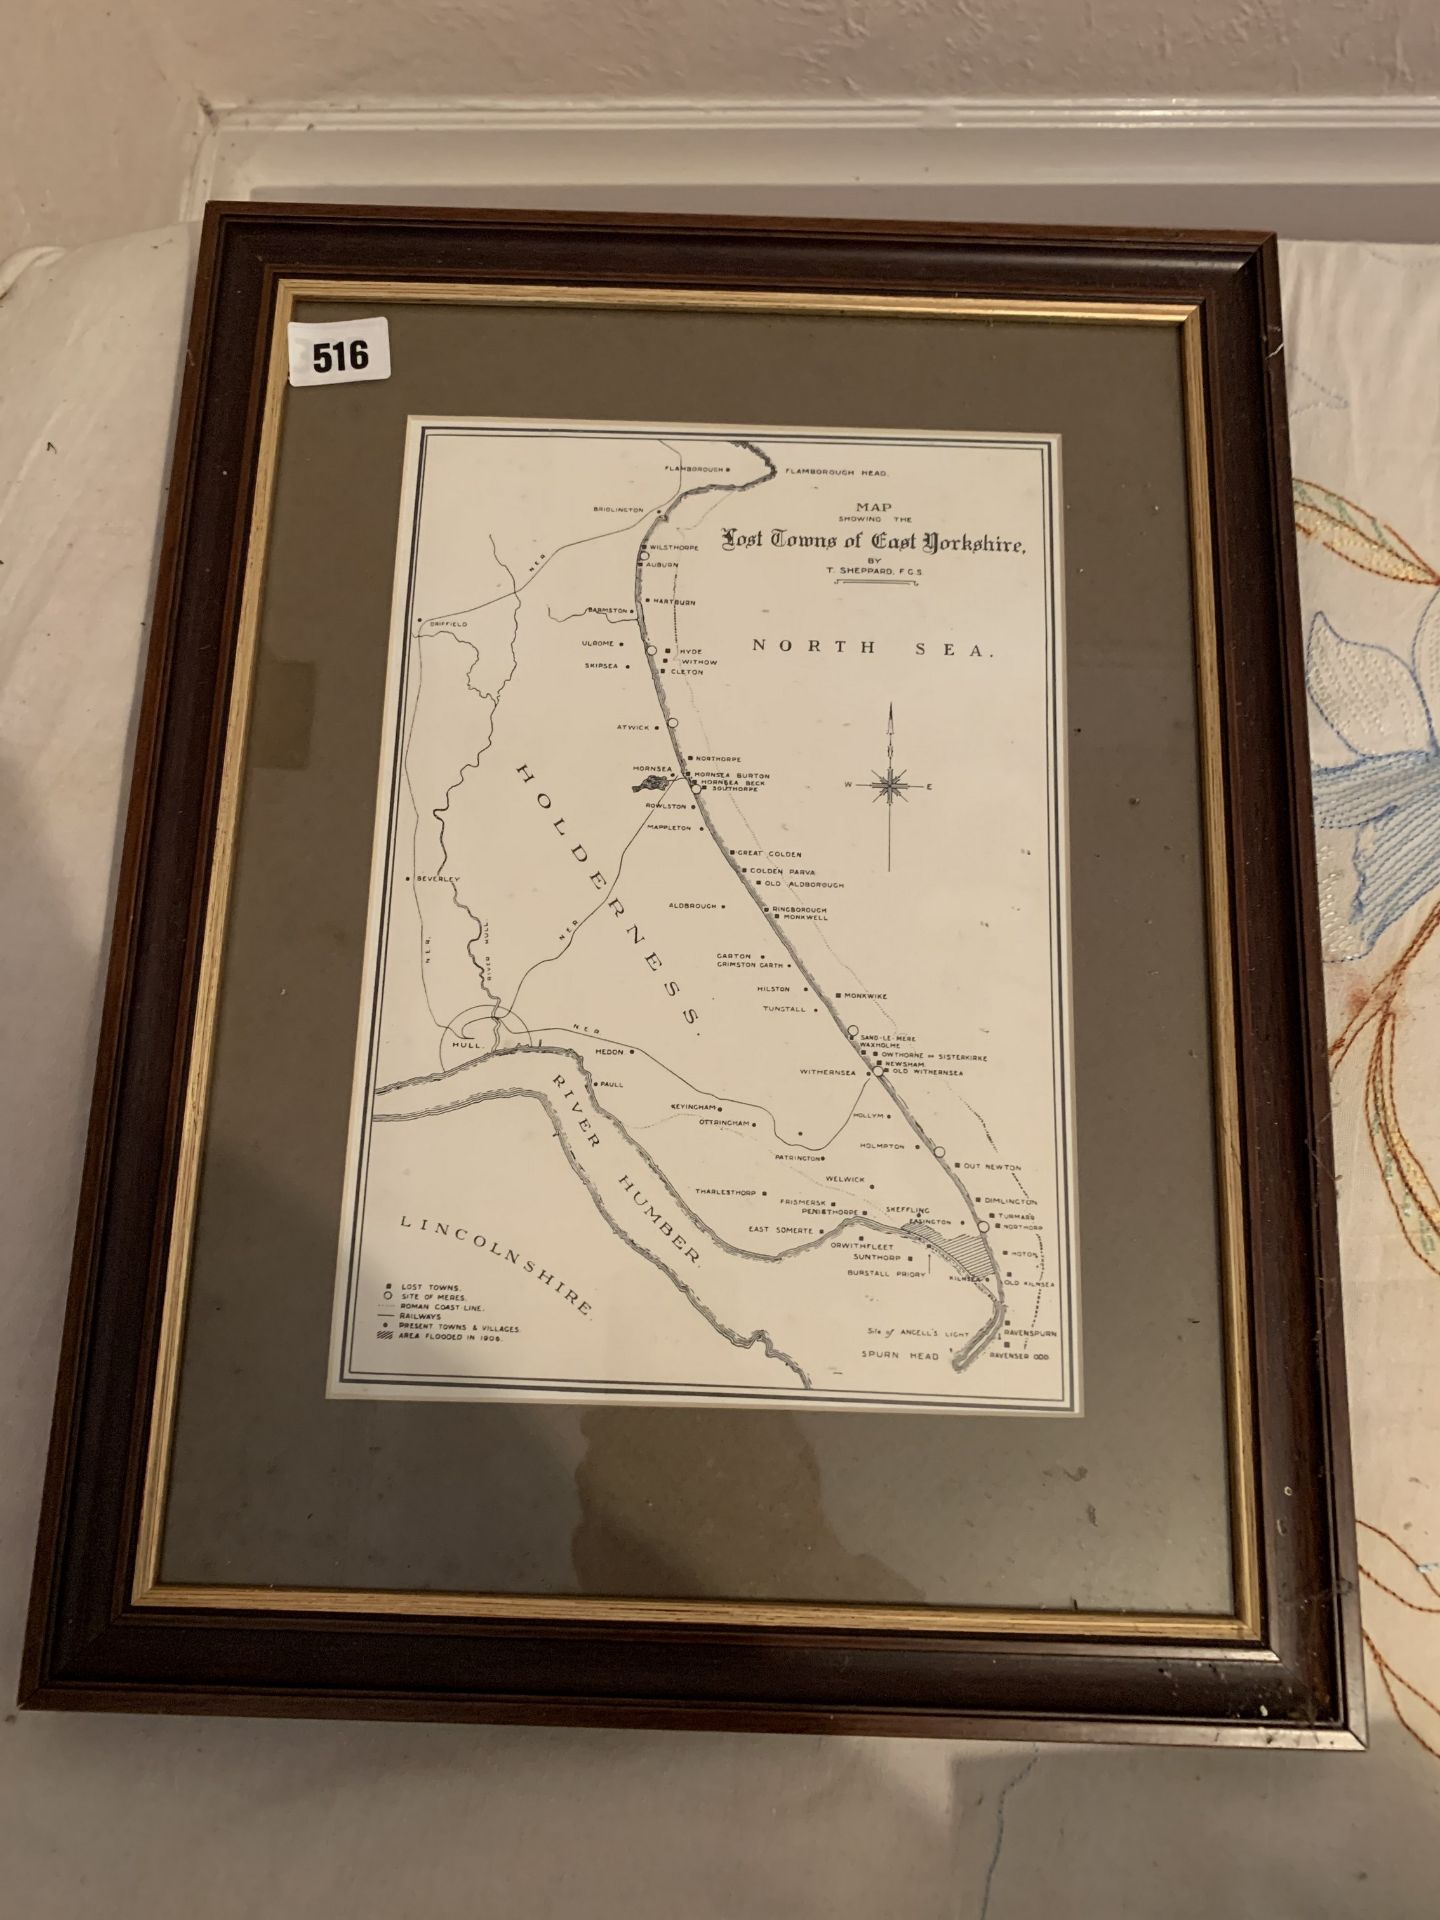 Framed map of lost towns of East Yorkshire